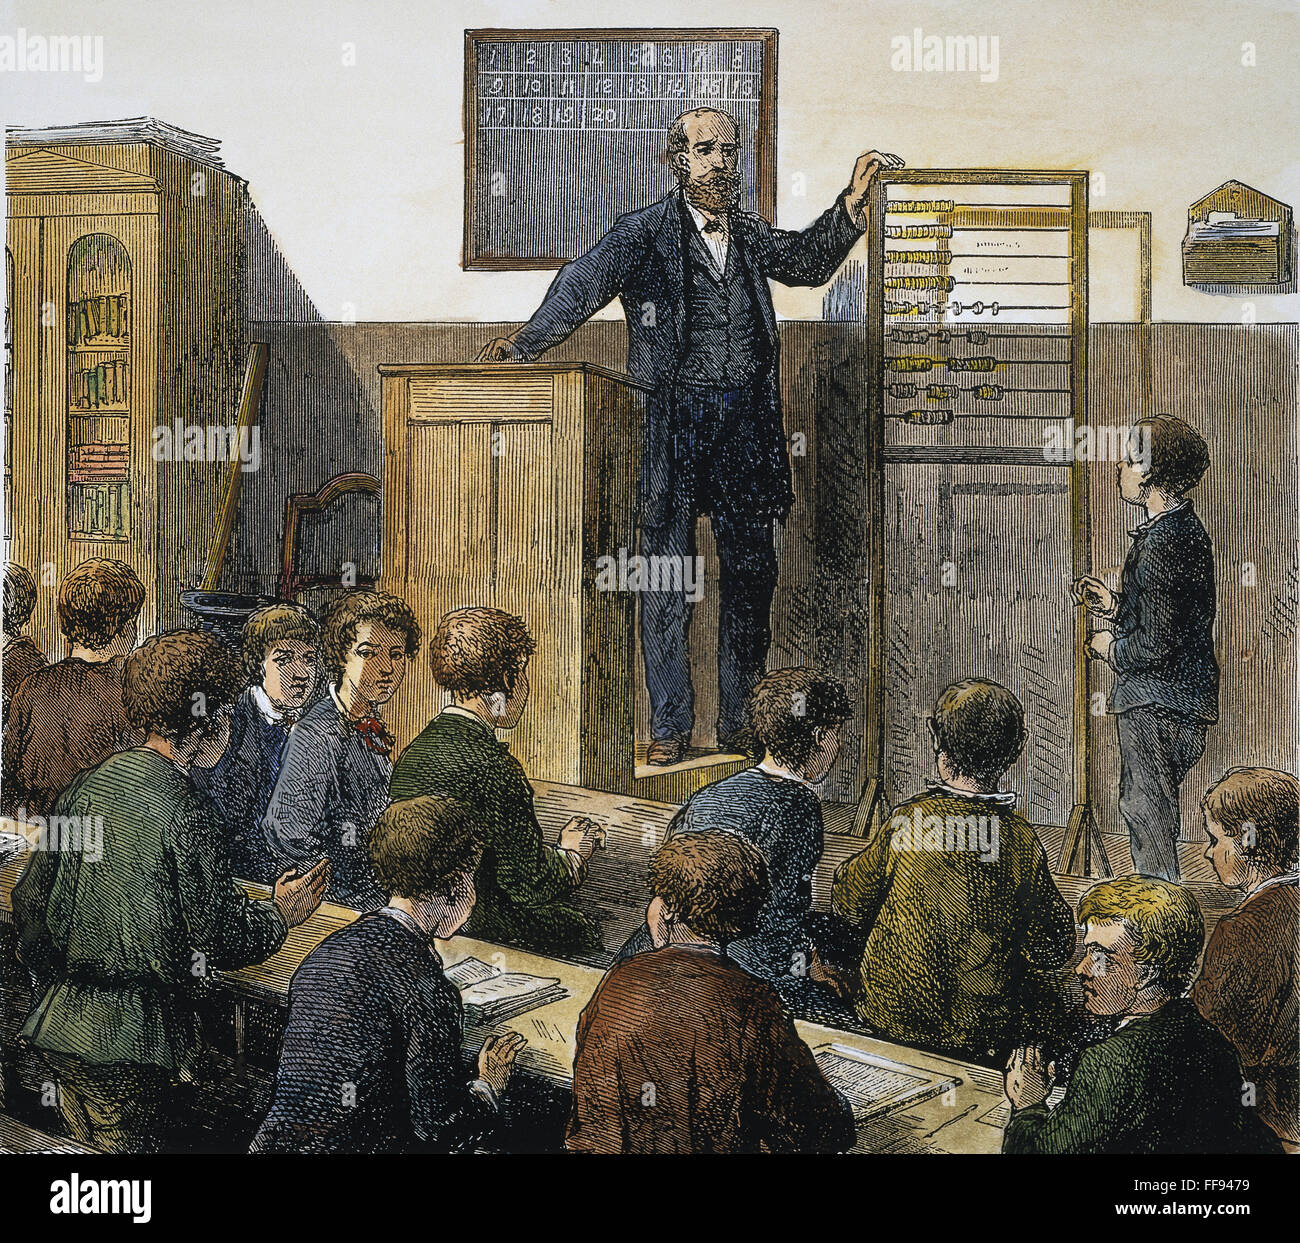 ELEMENTARY SCHOOL. /nA mathematics lesson in the use of an abacus at an elementary school in Berlin, Germany. Wood engraving, late 19th century. Stock Photo